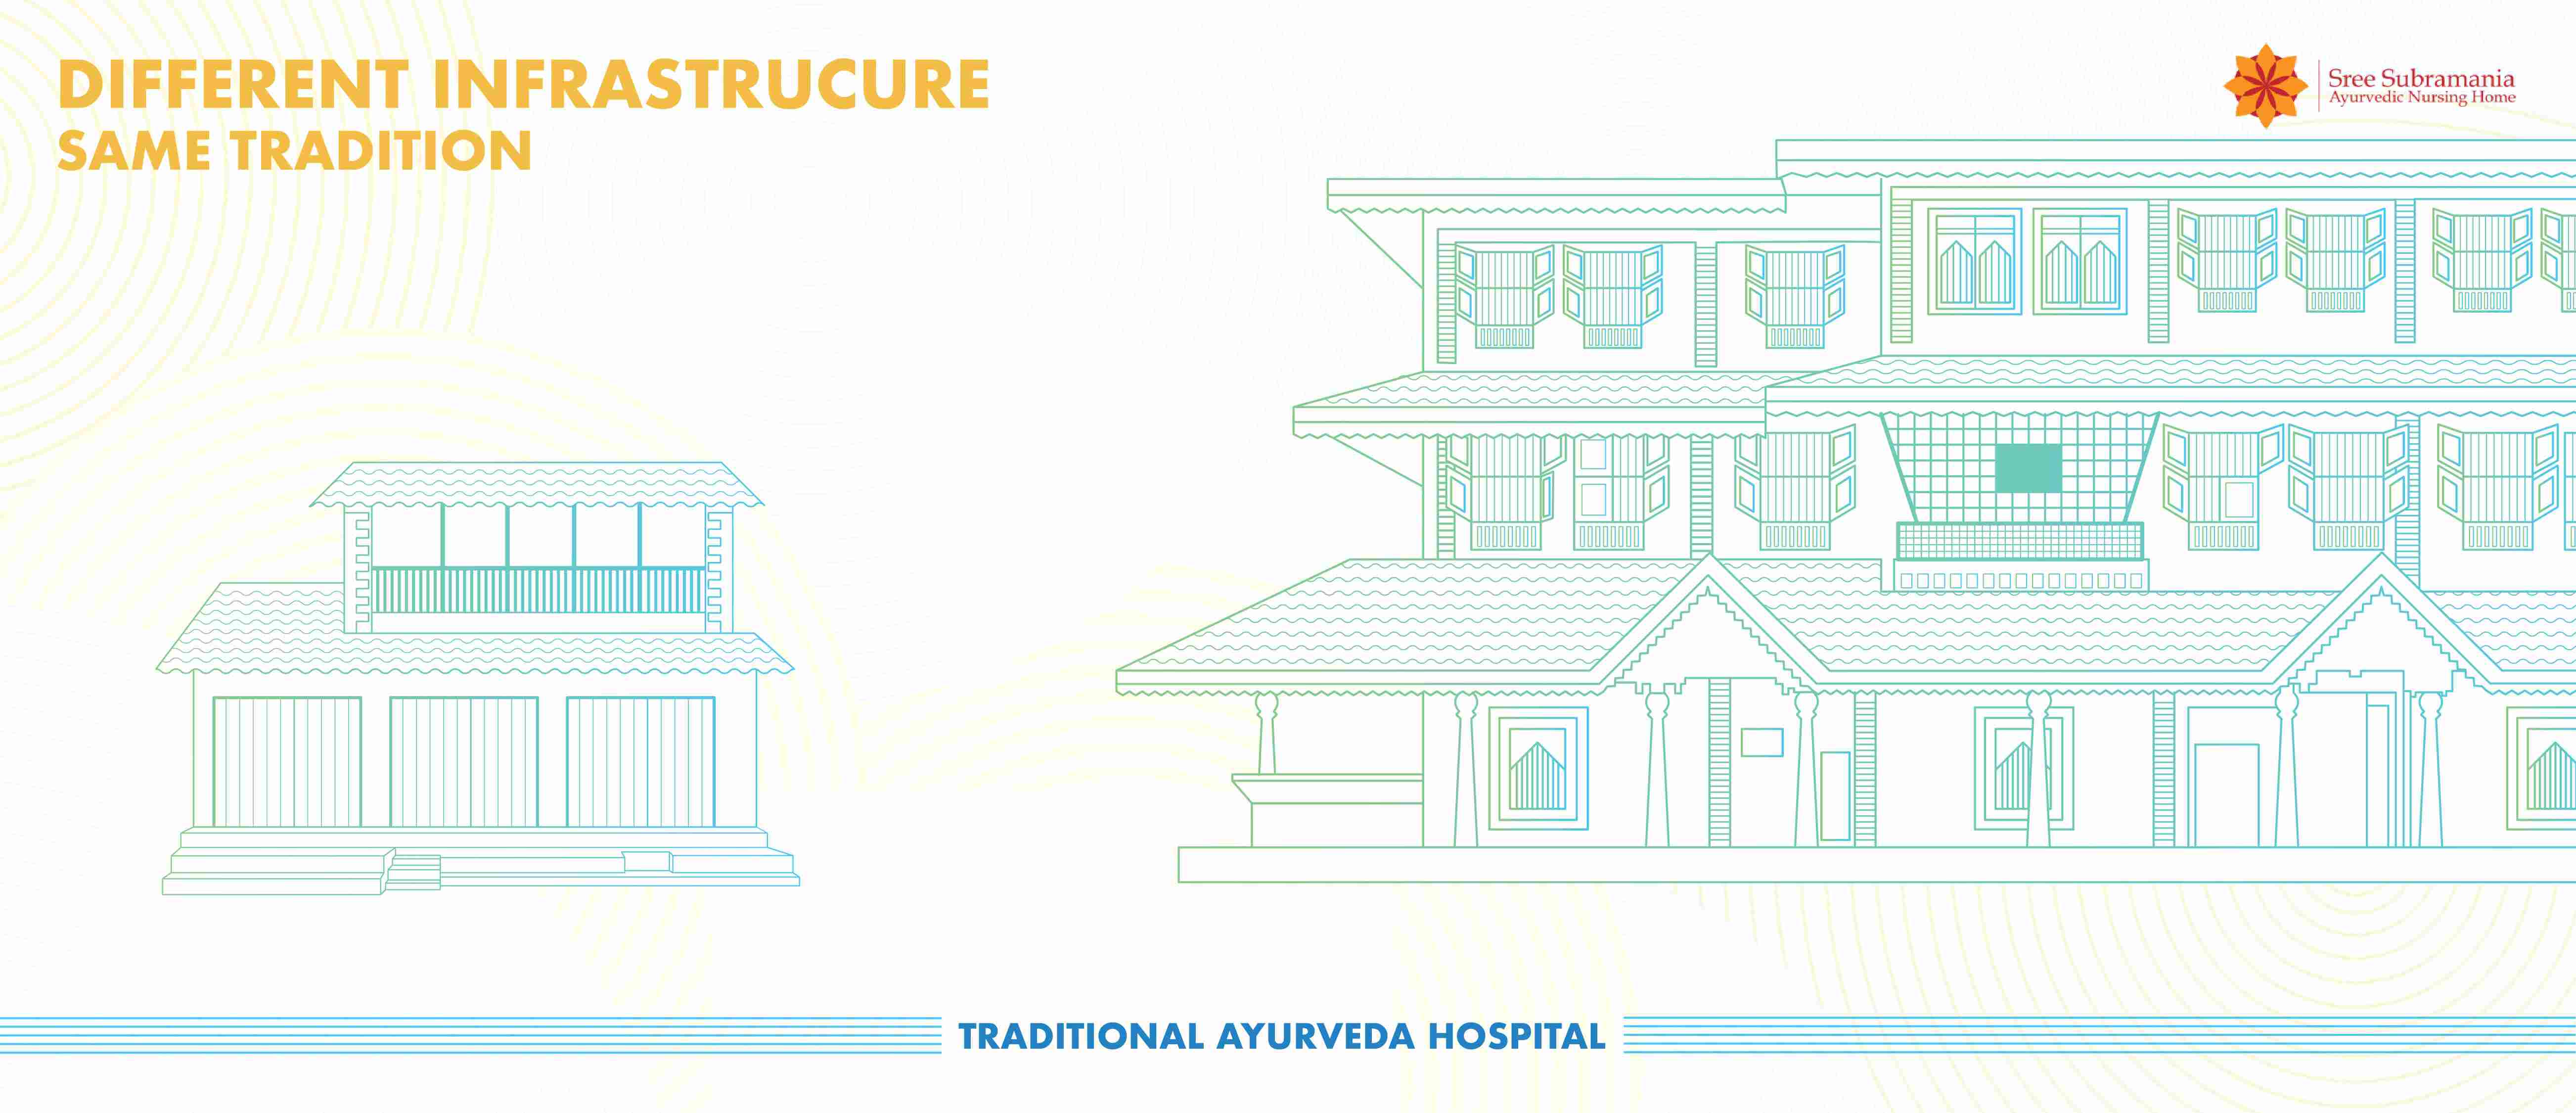 Infrastructure at SSANH is evolved from a small traditional building used for ayurvedic consultations to a big traditional building for Kerala Ayurveda and Panchakarma treatment in Kozhikode